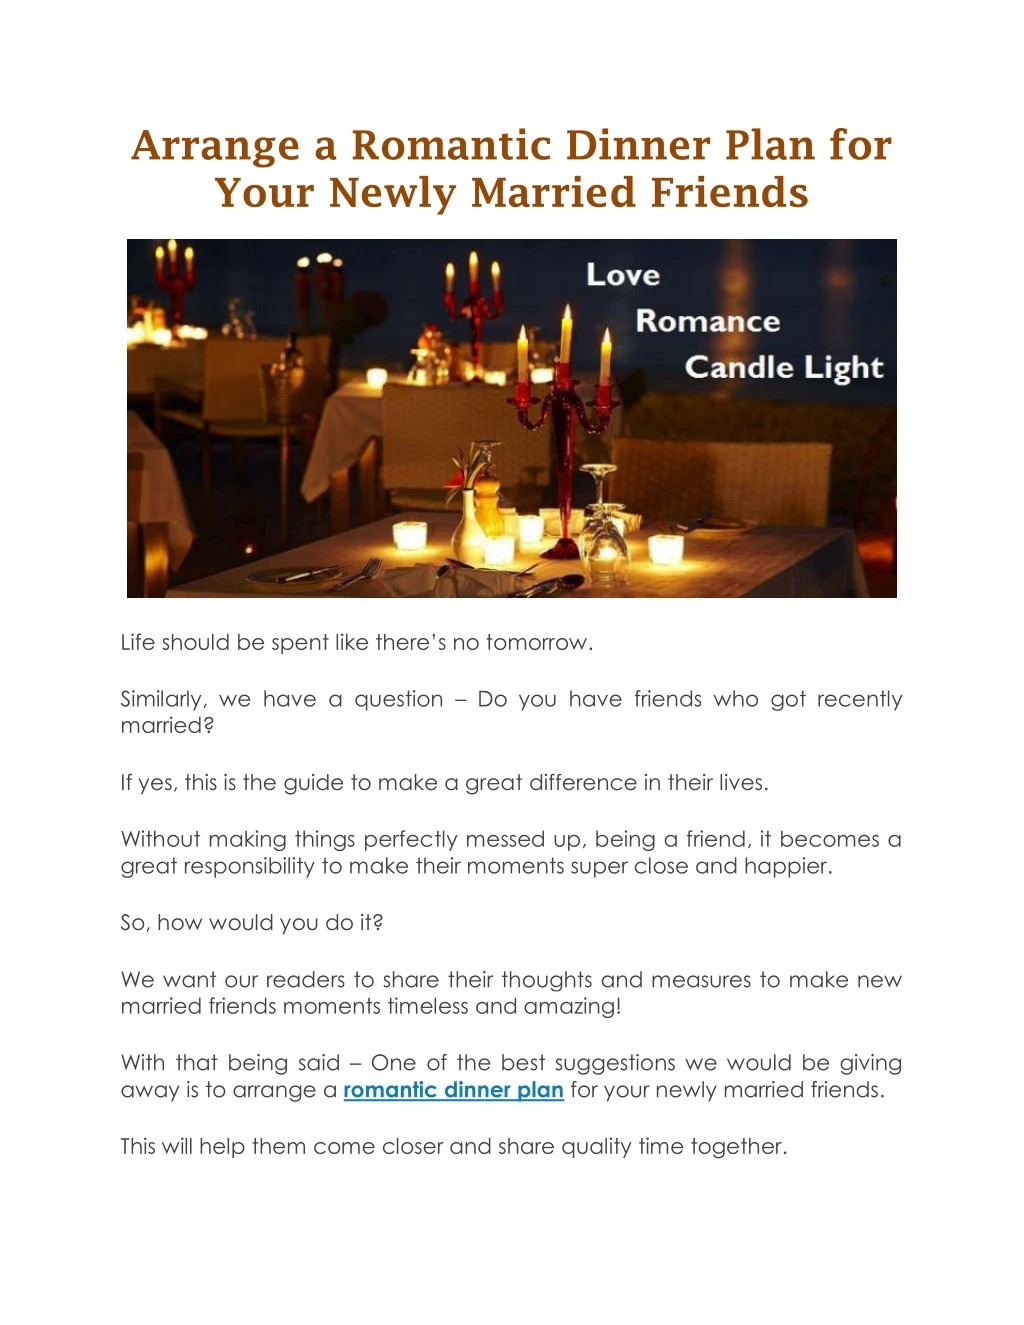 arrange a romantic dinner plan for your newly